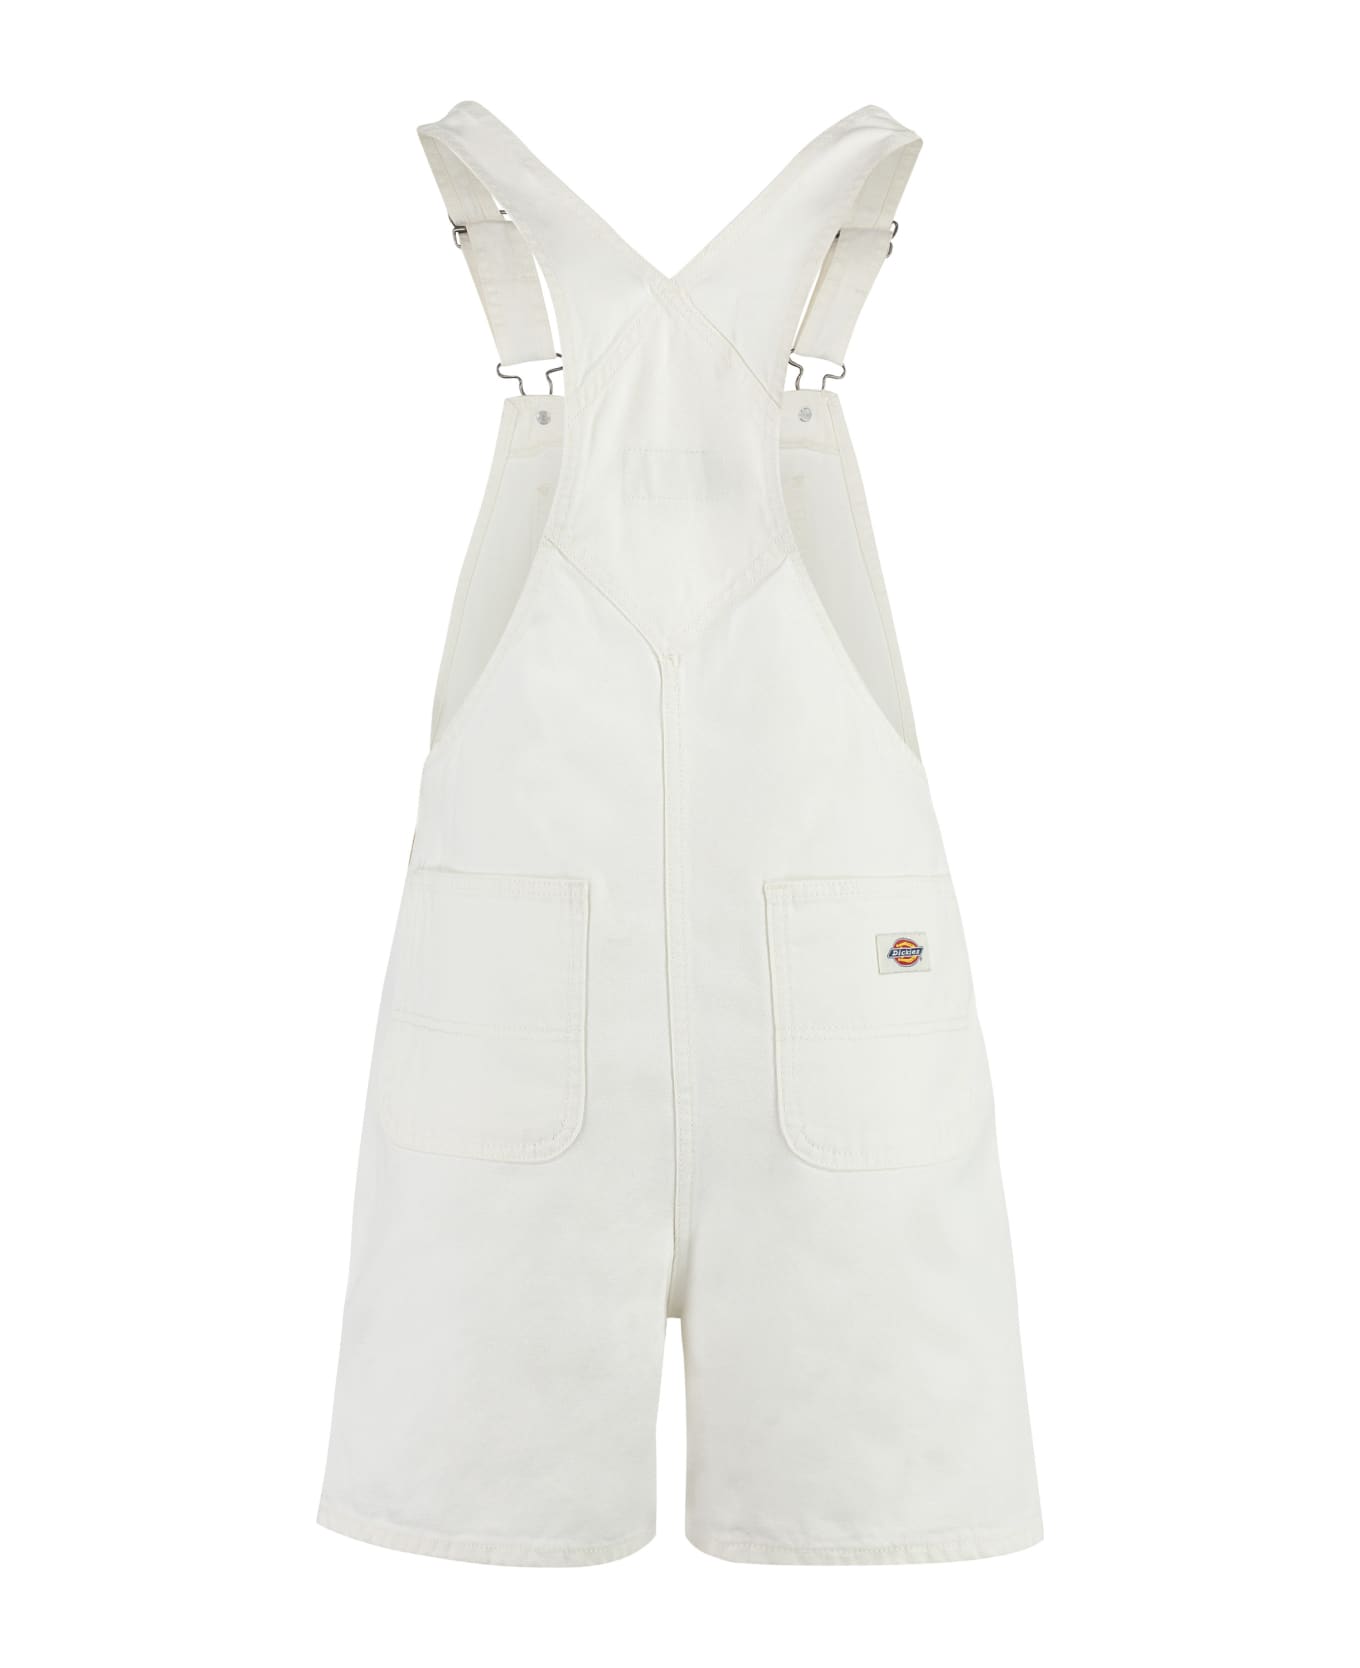 Dickies Short Cotton Overall - White